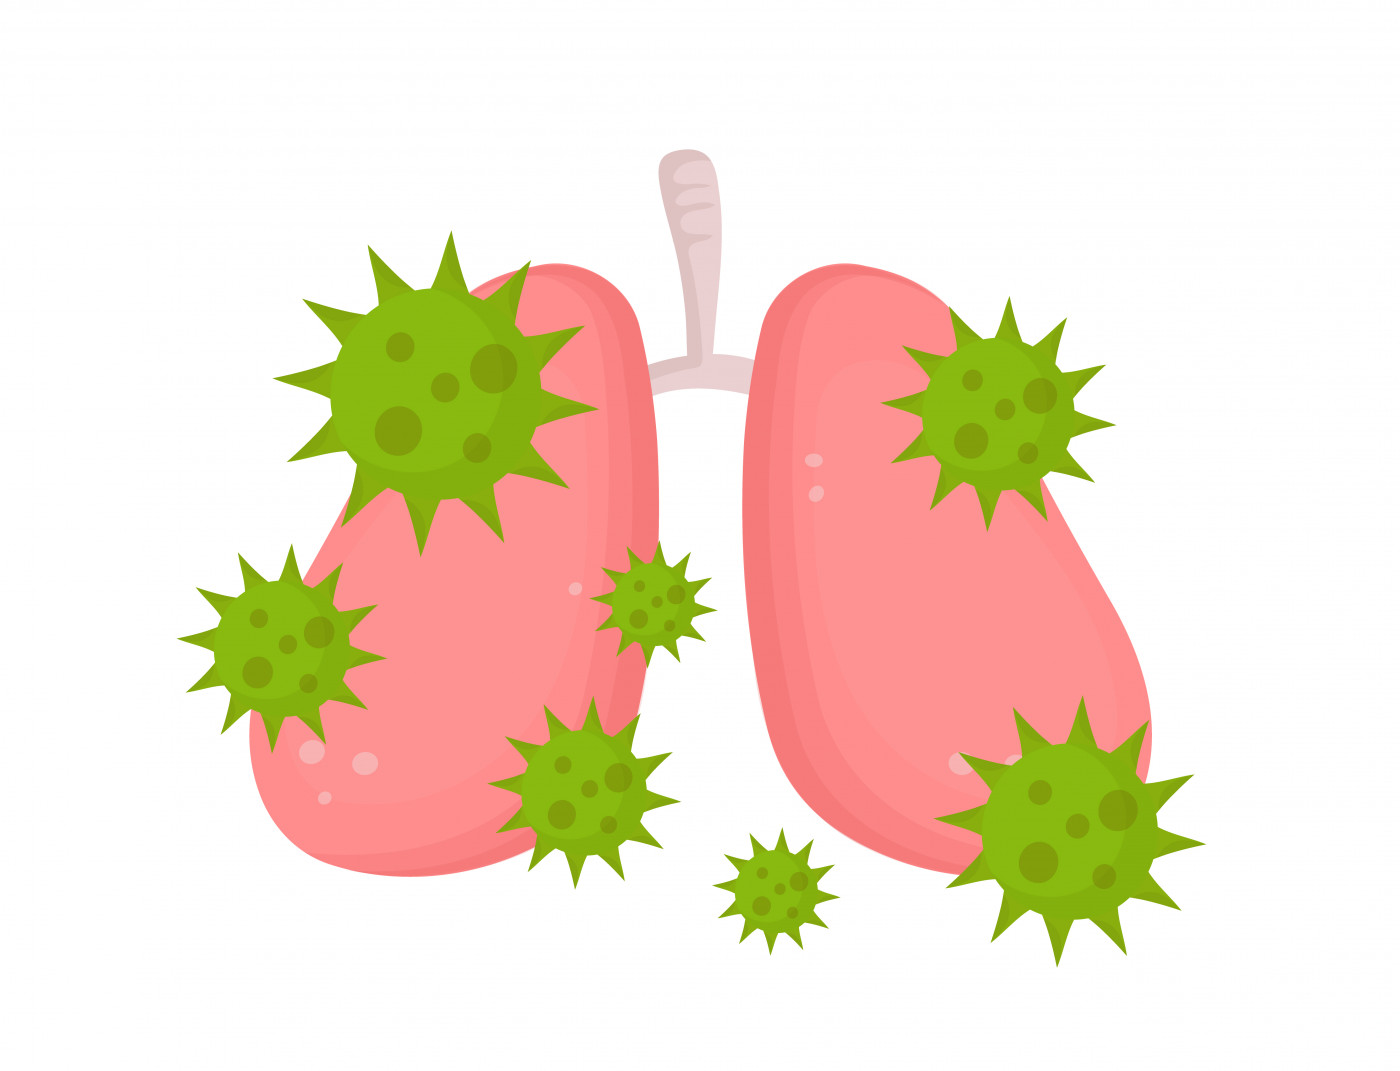 bacterial infections in COPD